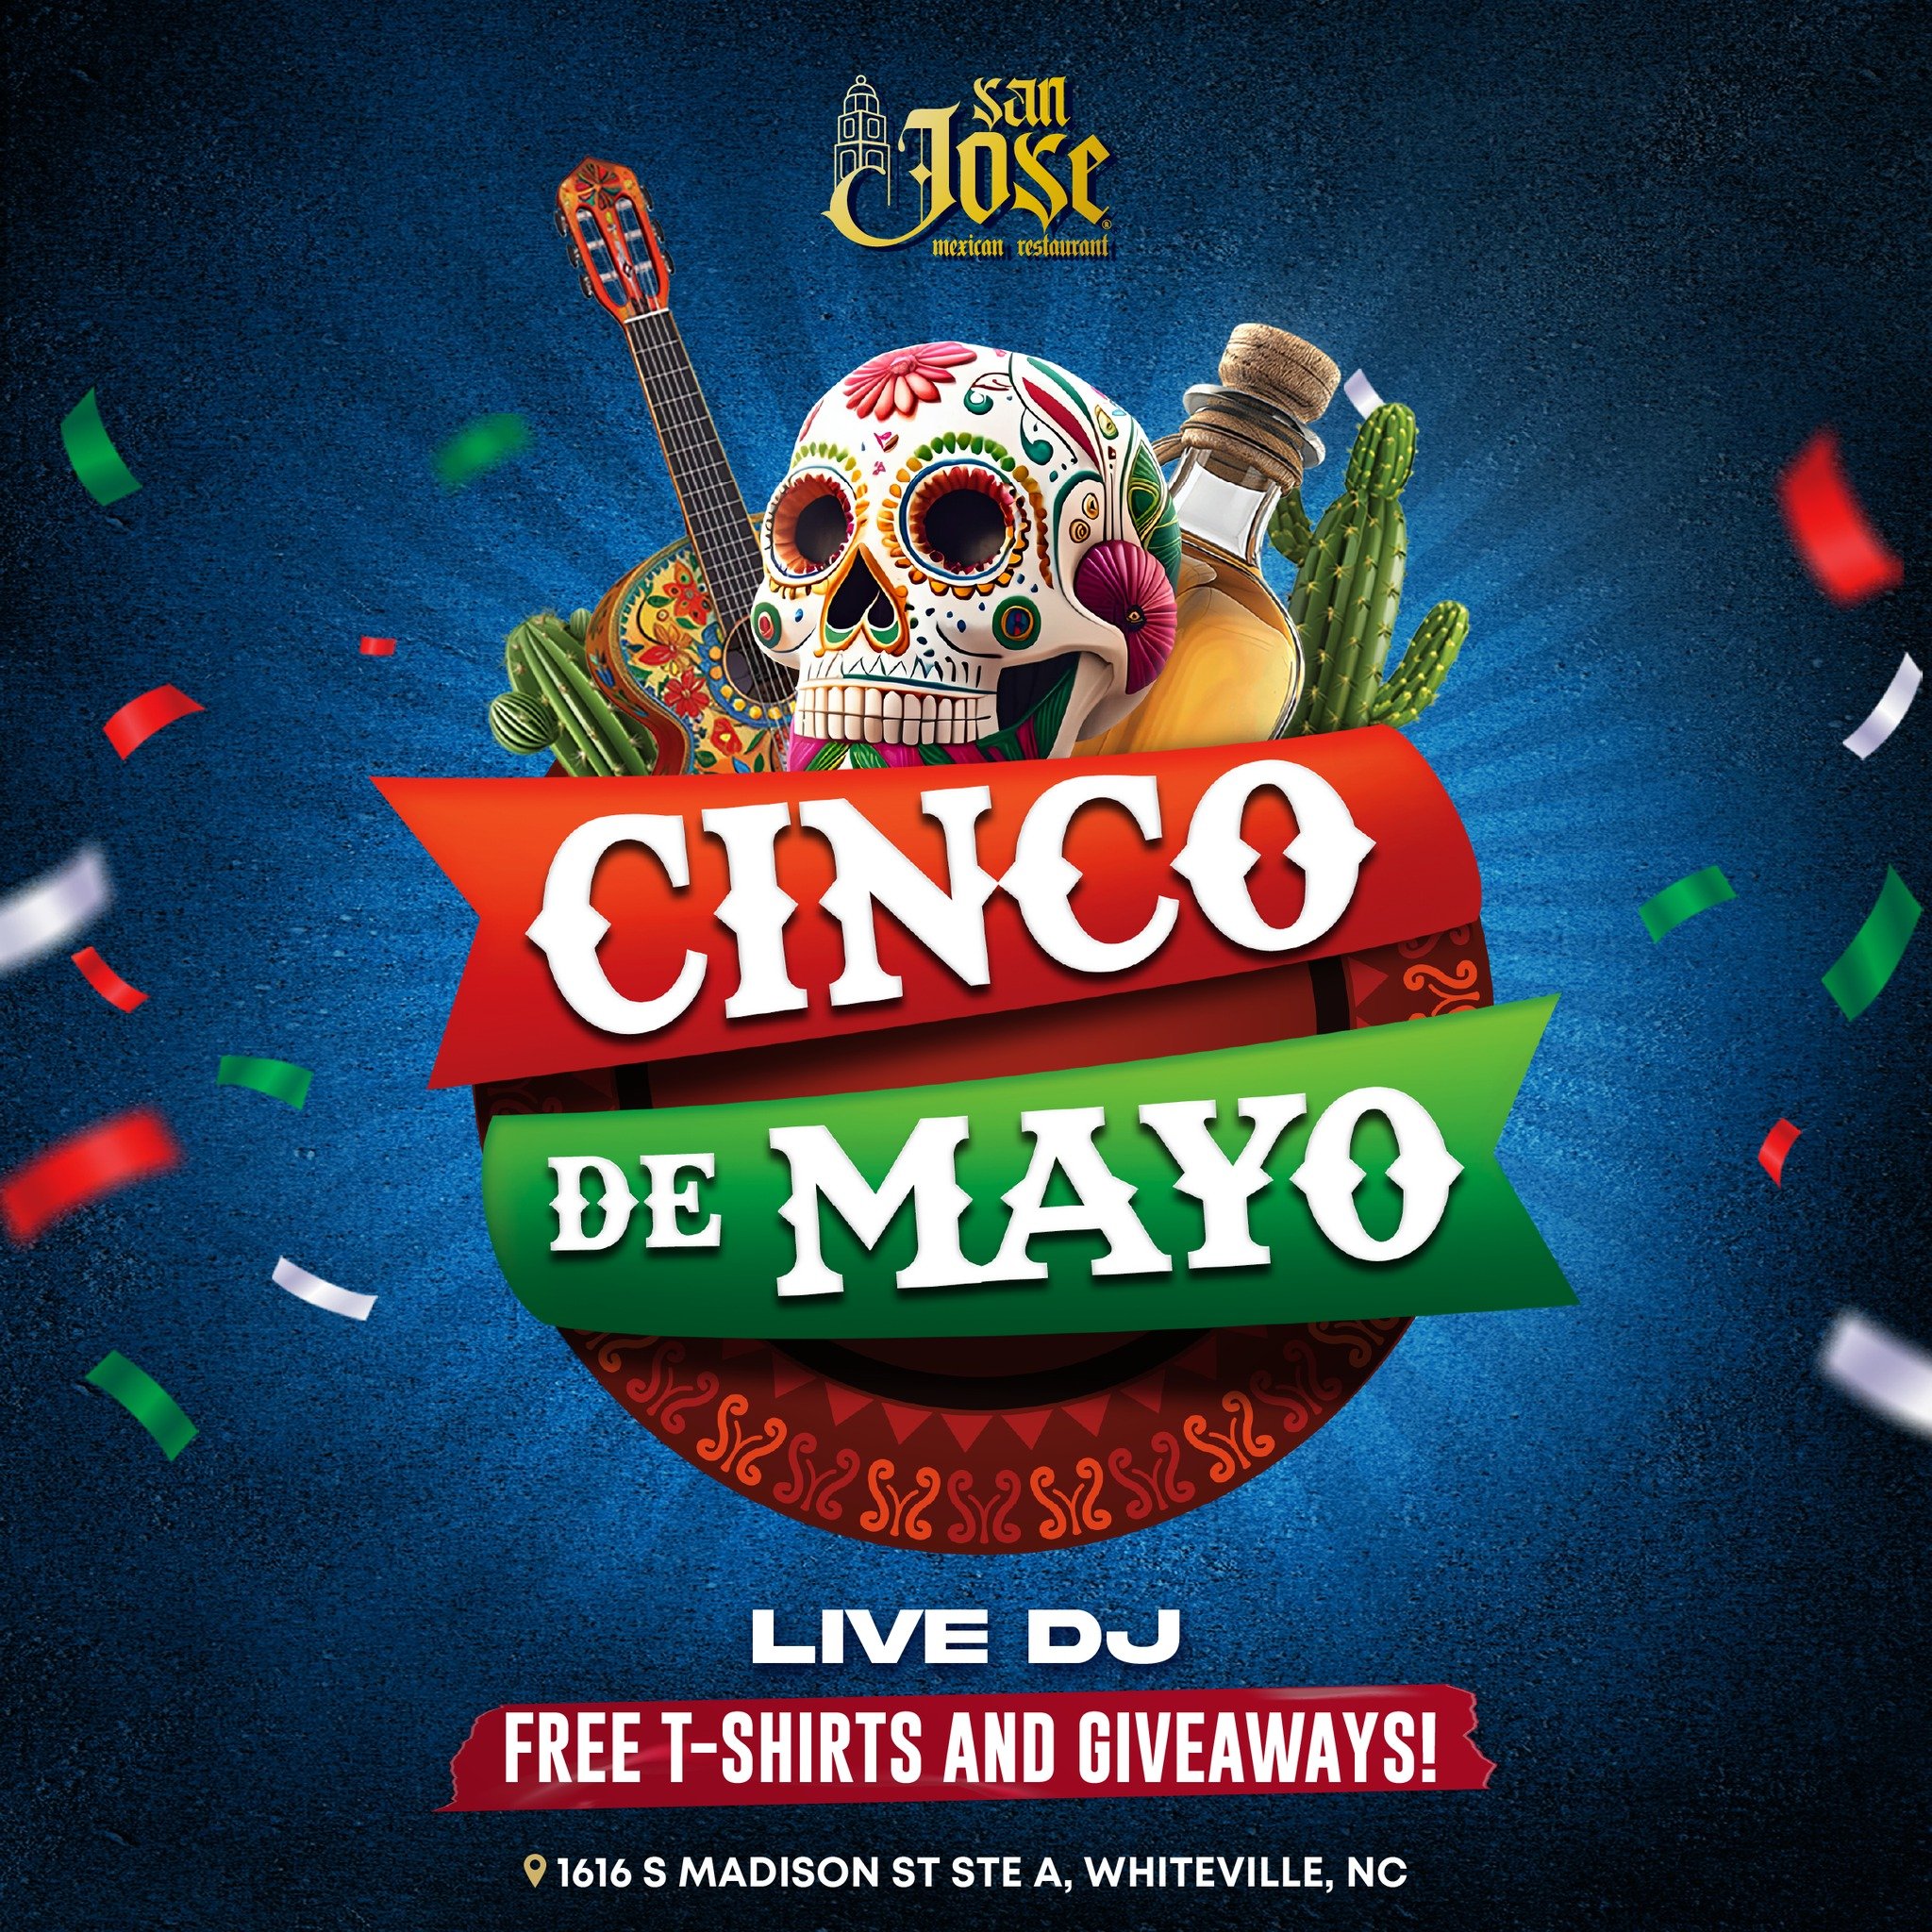 Cinco de Mayo is coming and we can&rsquo;t wait to celebrate with you! 🤠🇲🇽 Join us for a fun party filled with Live Music, Free T-shirts, and Giveaways!🕺

There&rsquo;s something for everyone to enjoy!😉
📍 1616 S. Madison Street Whiteville, NC 2